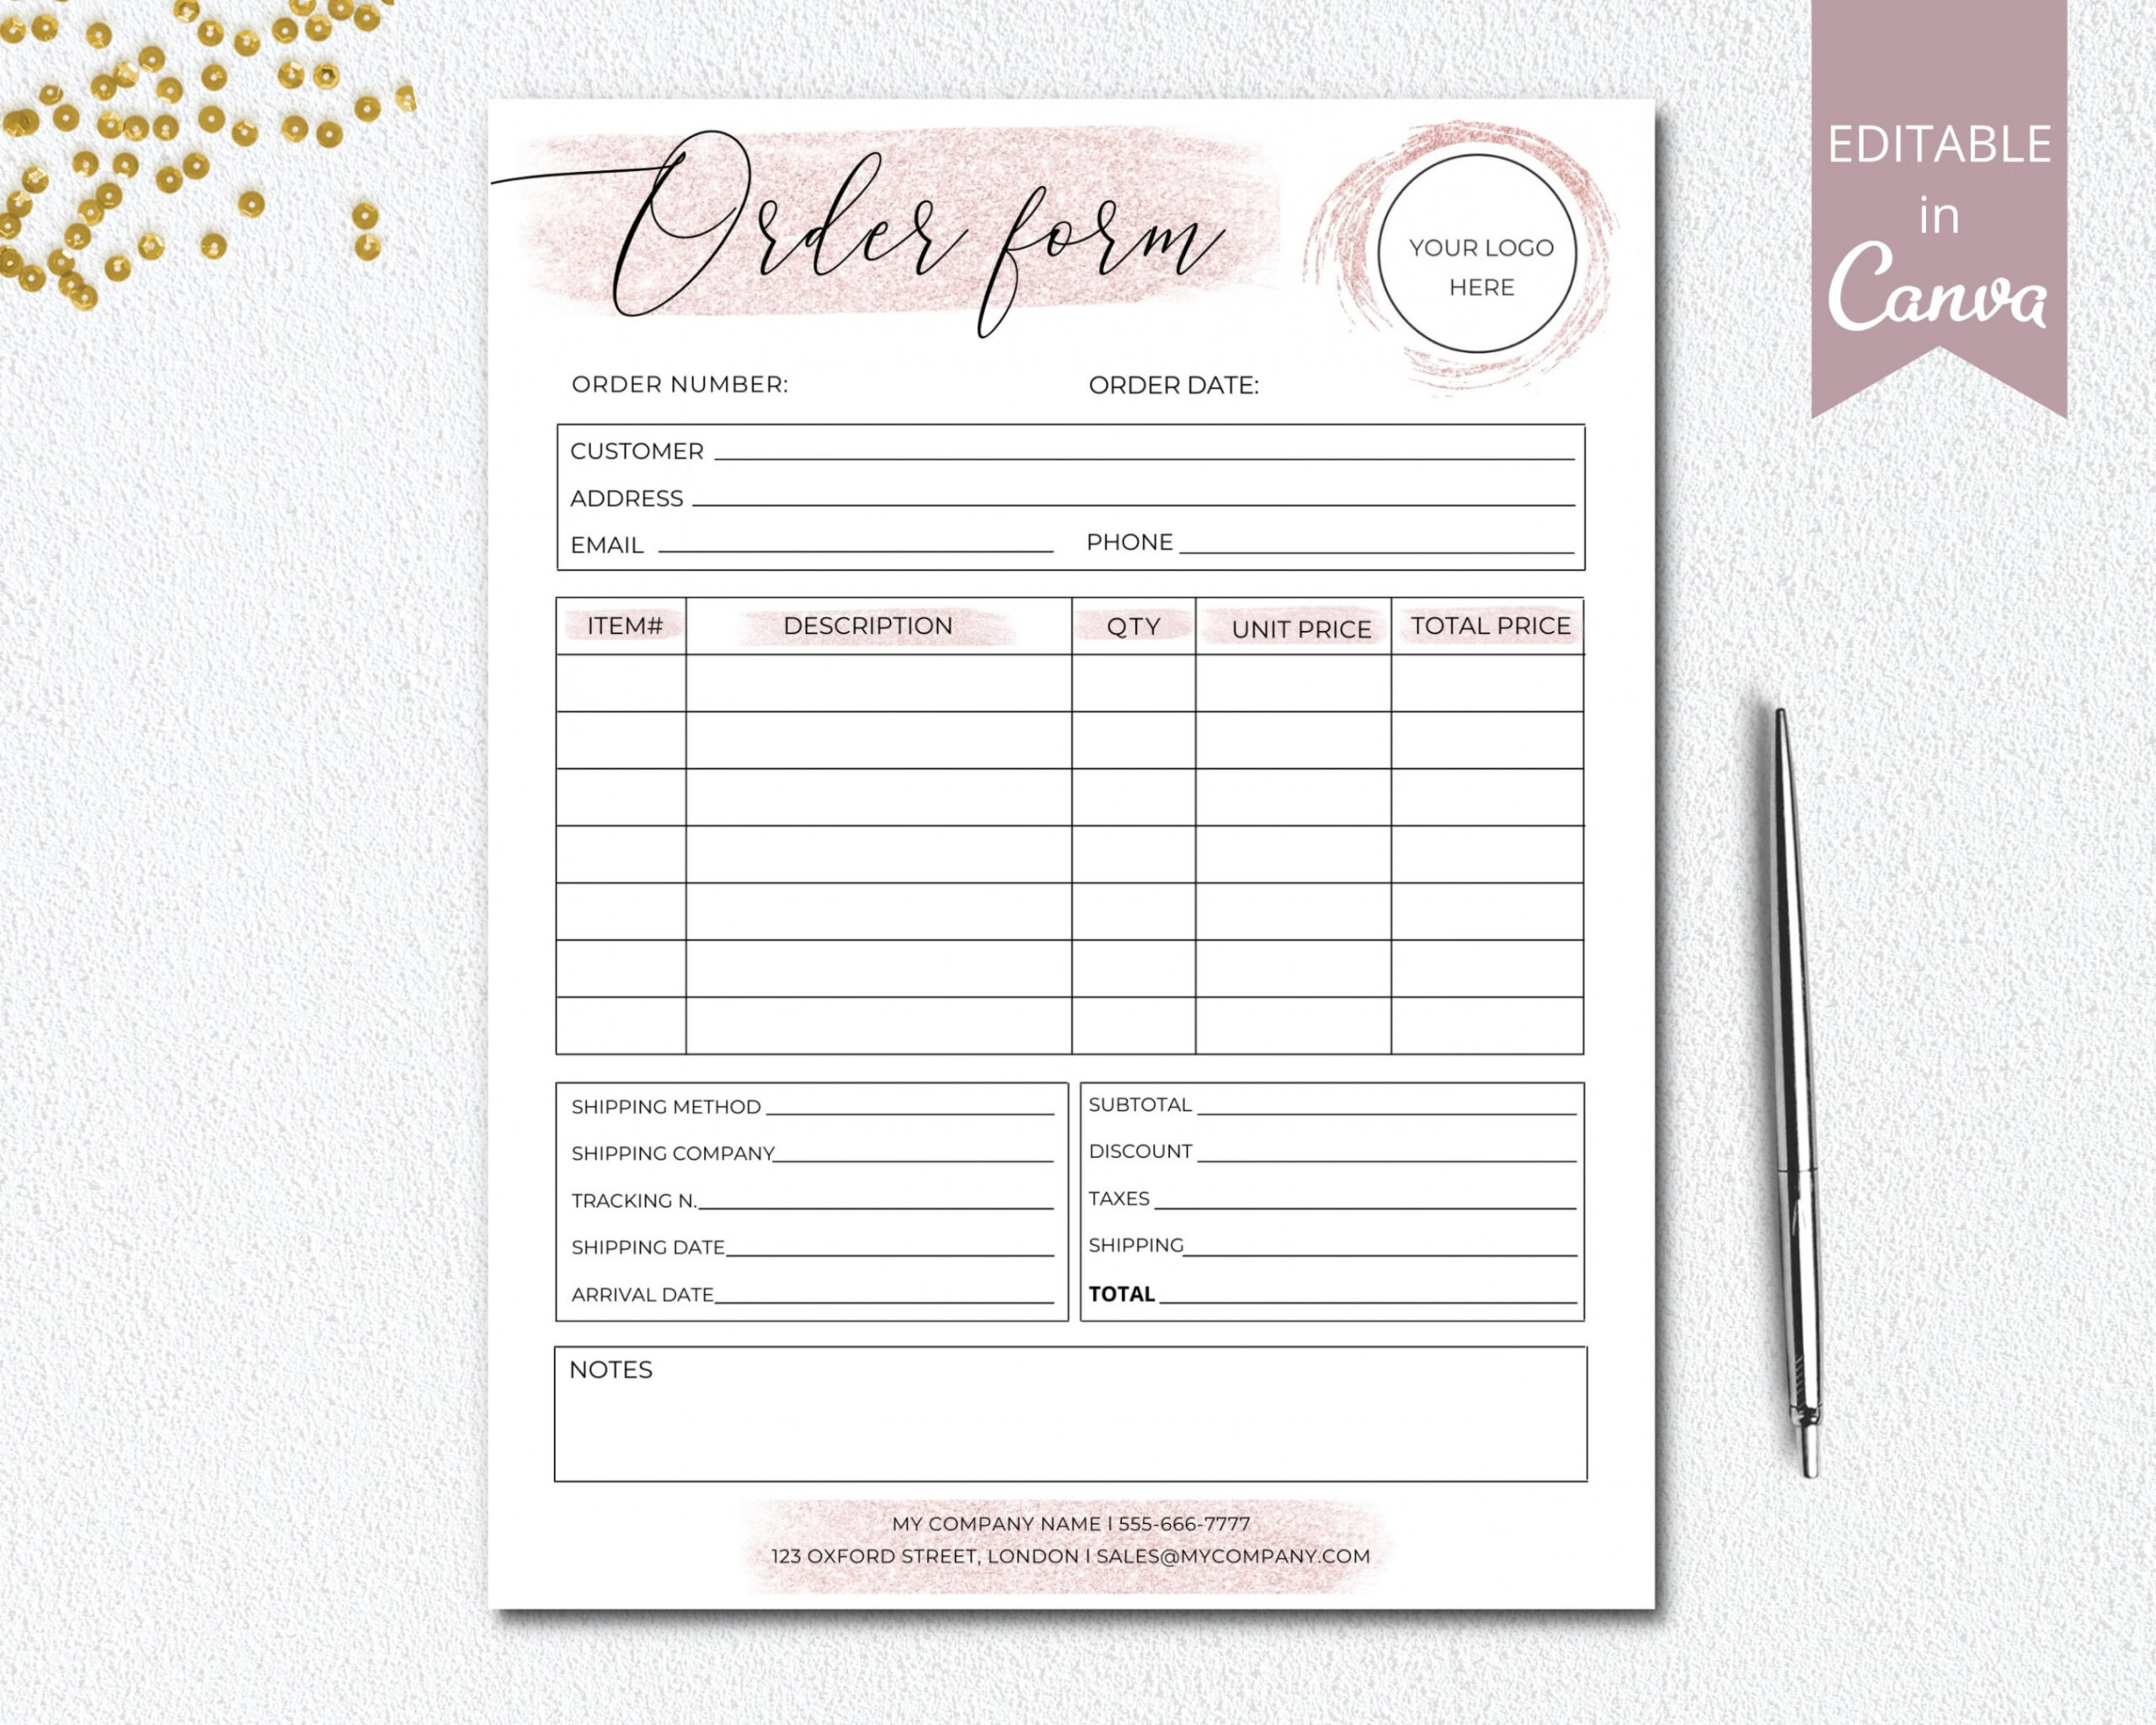 Small Business Free Printable Order Forms - Printable - Editable Order Form Small Business Forms Printable Craft - Etsy